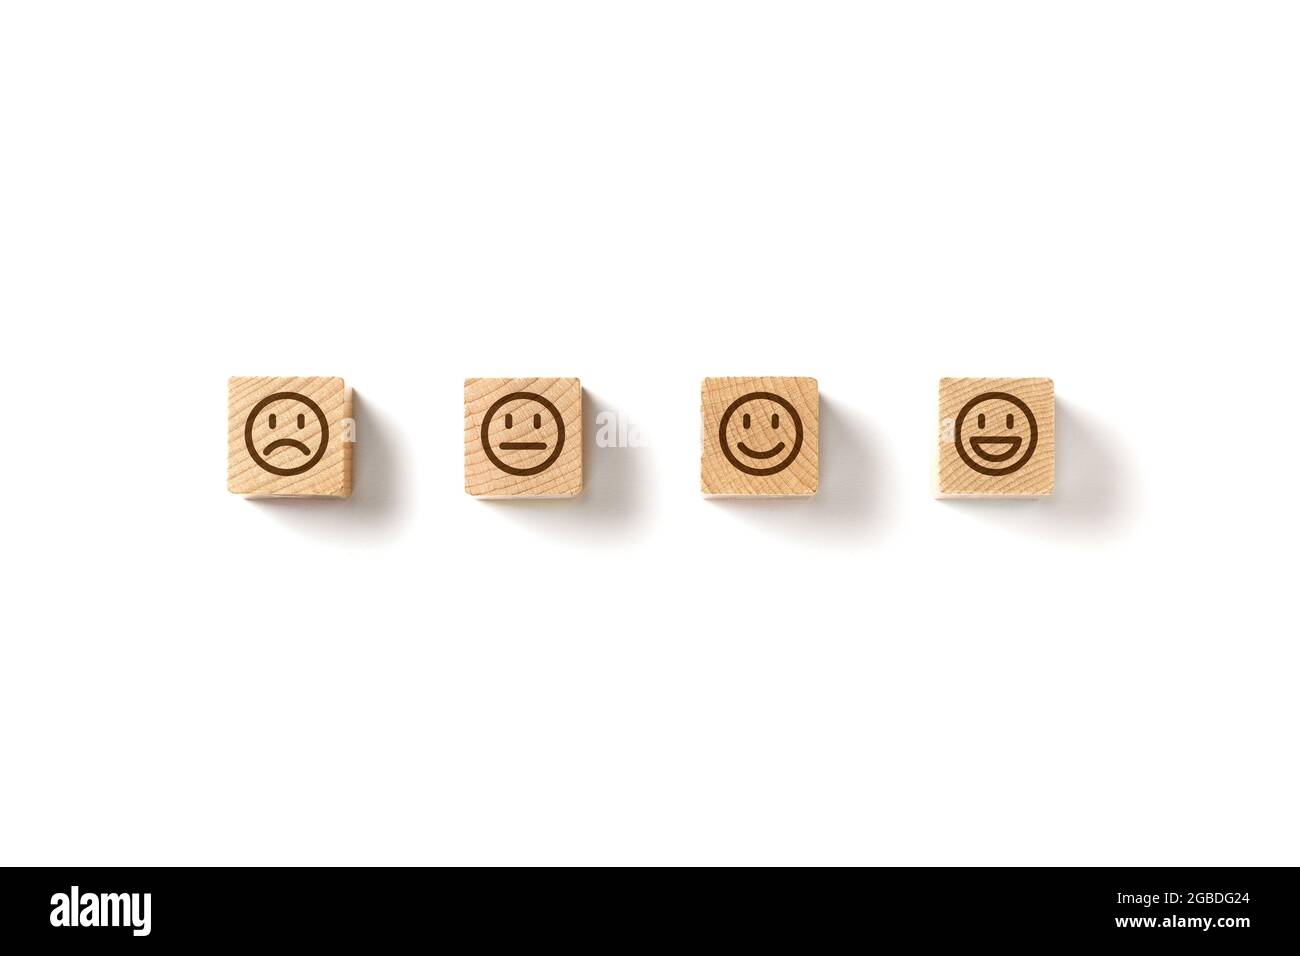 Emoticon faces in wooden blocks over white background. Service evaluation and satisfaction survey concepts. Angry, neutral, good mood and happy. Copy Stock Photo